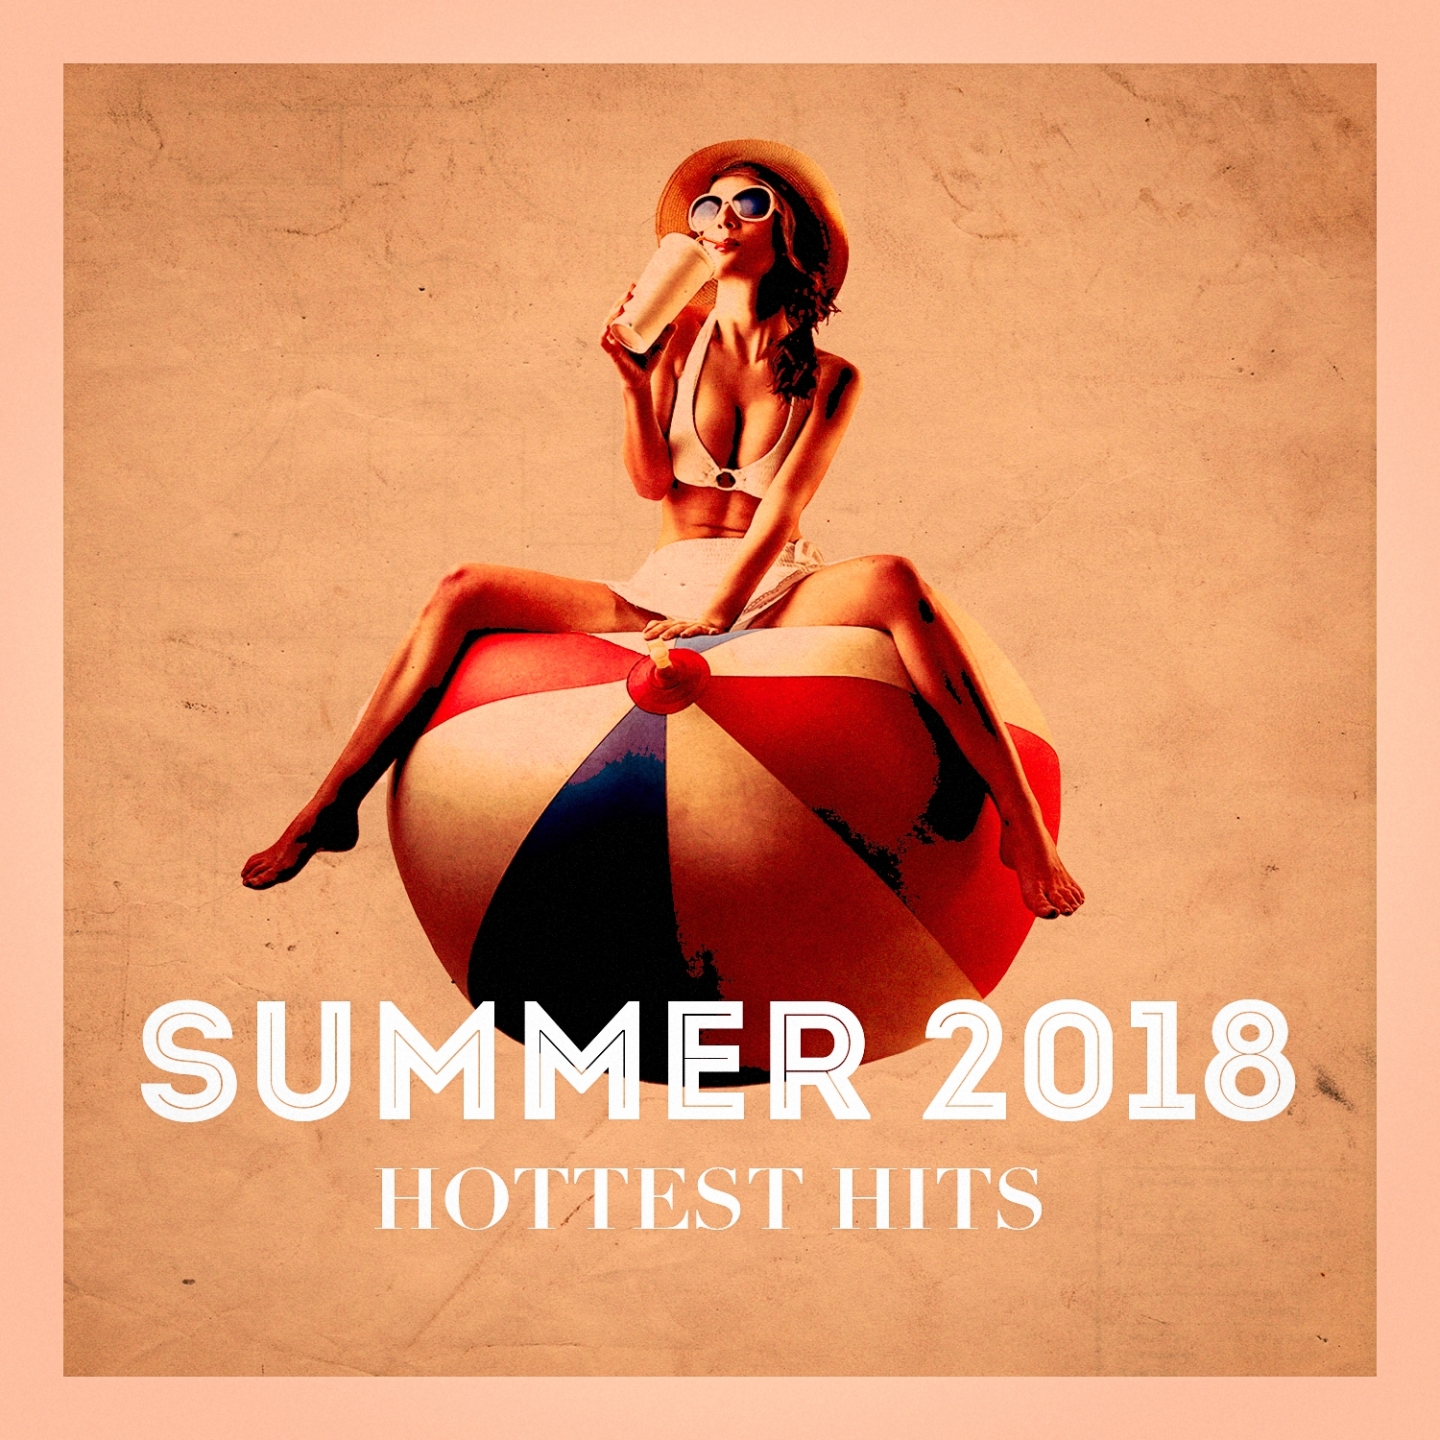 Summer 2018 Hottest Hits